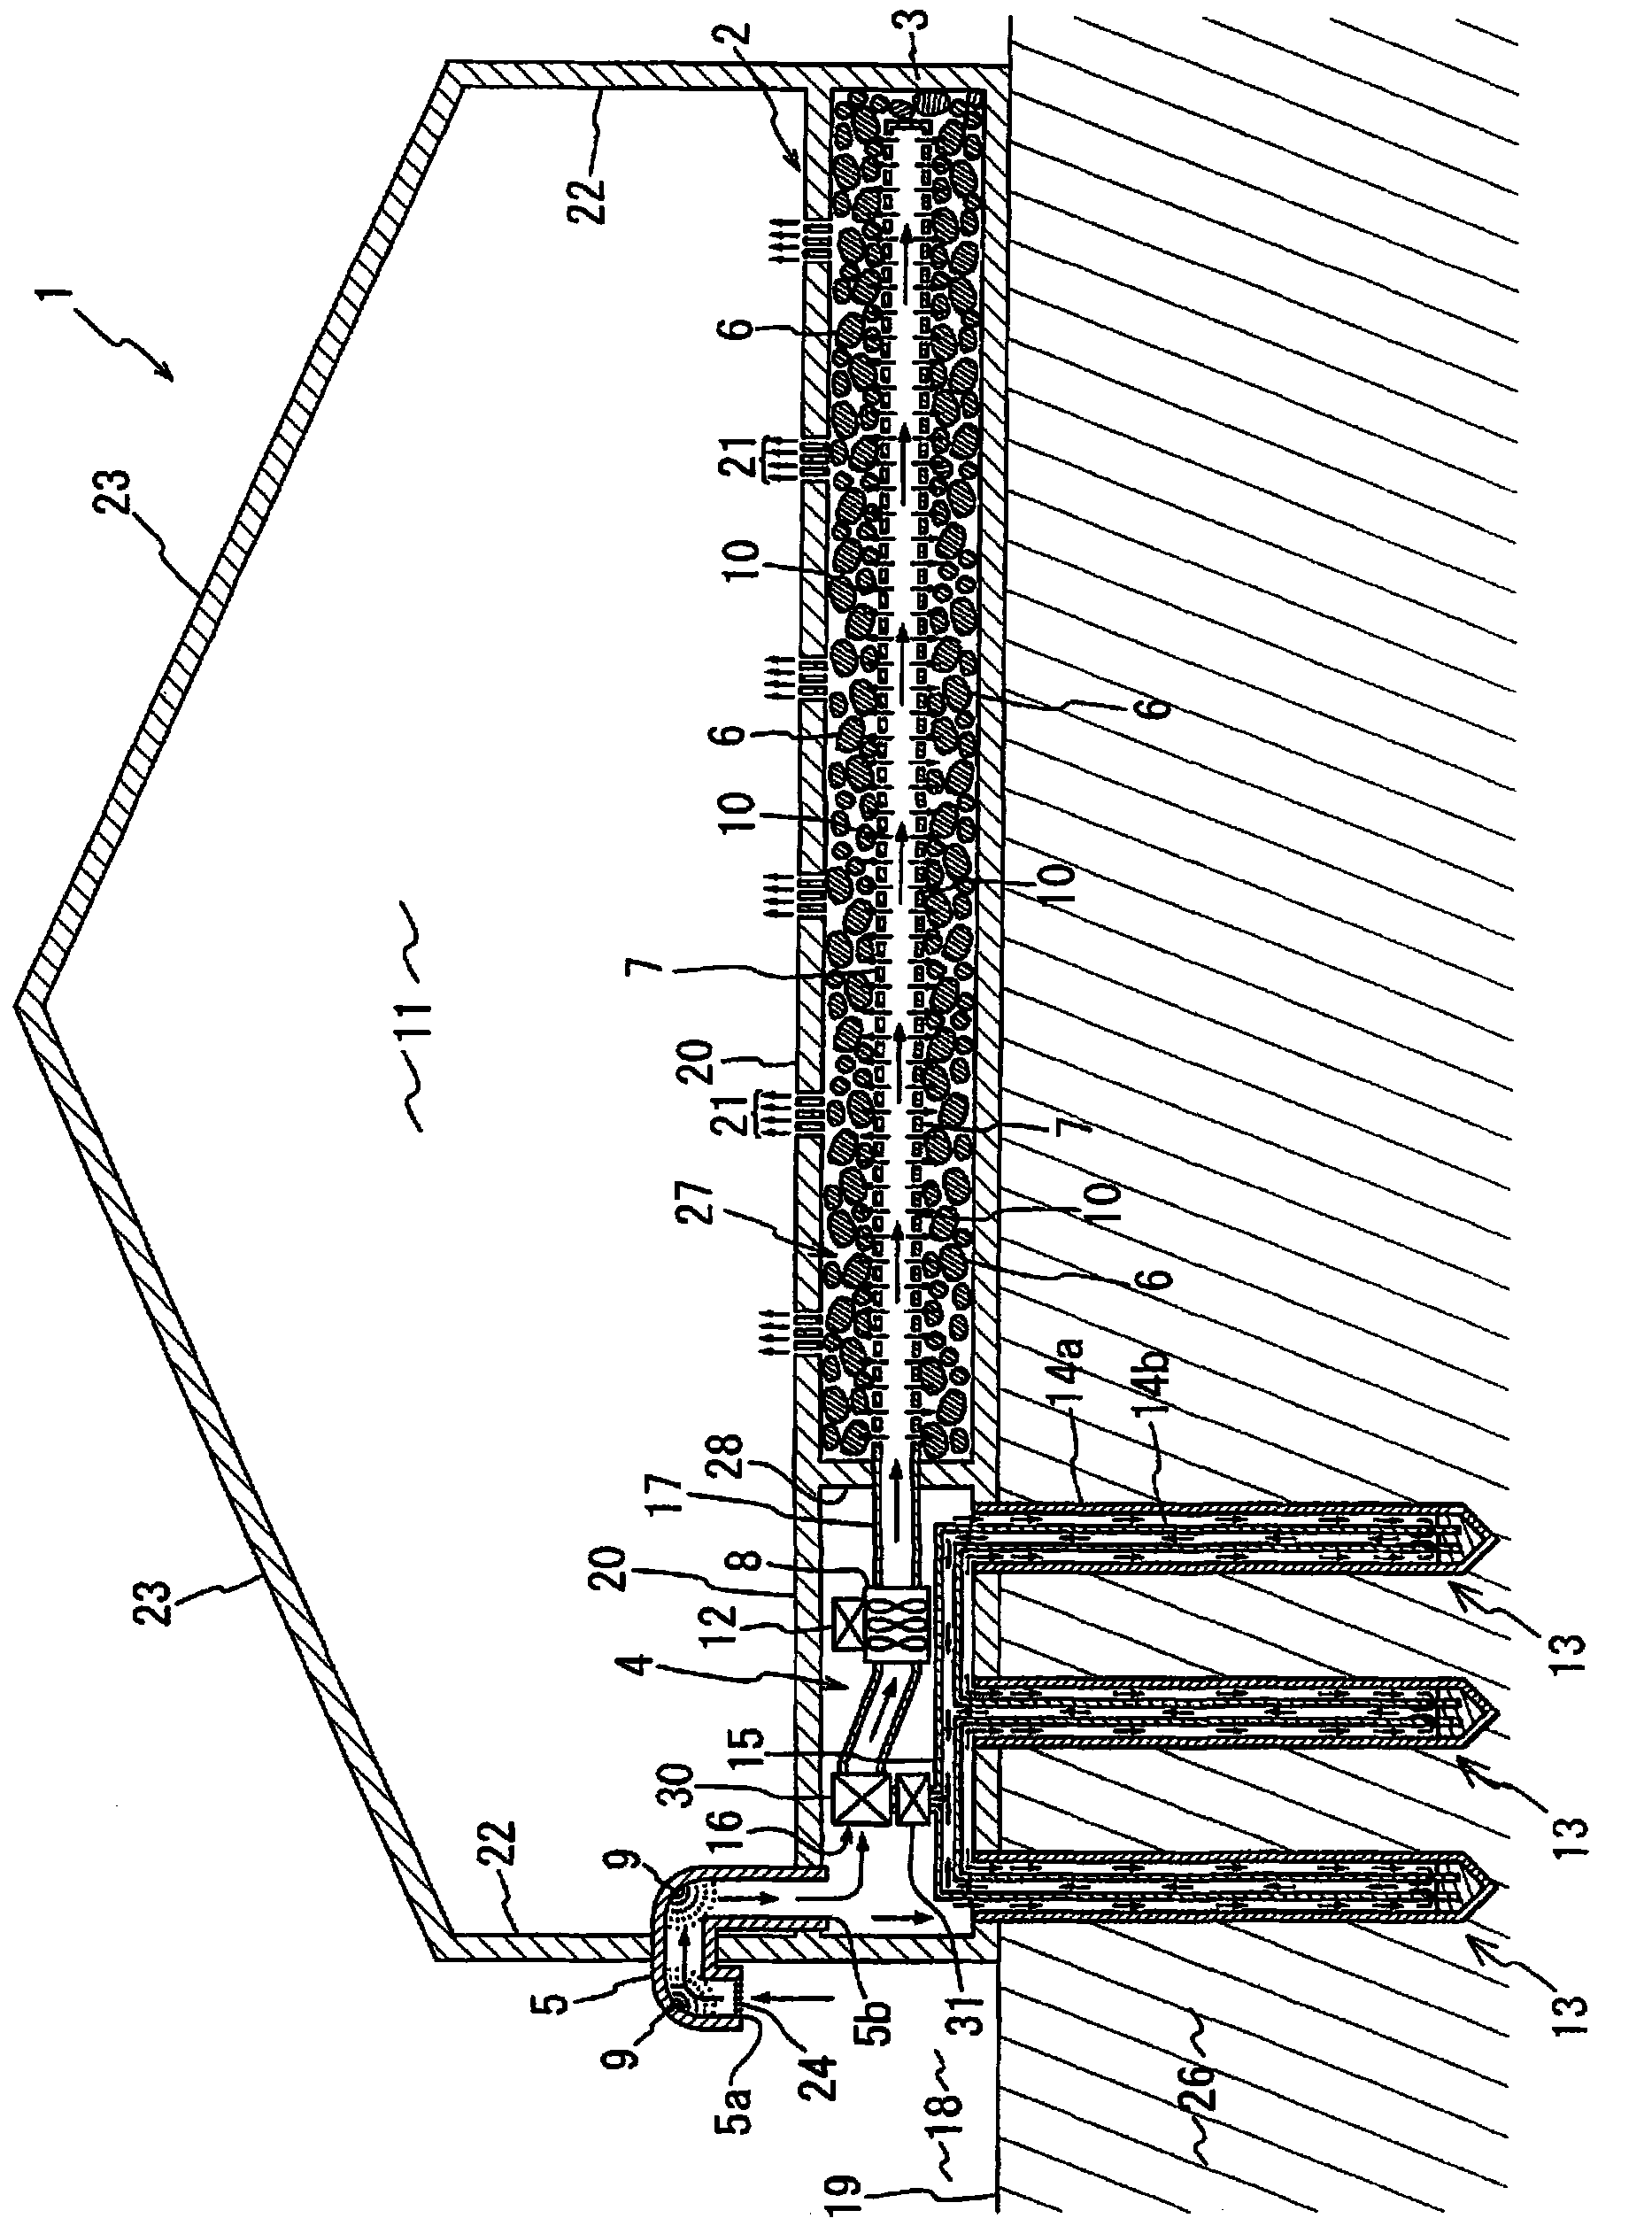 Air-conditioning system utilizing natural energy and building using the same